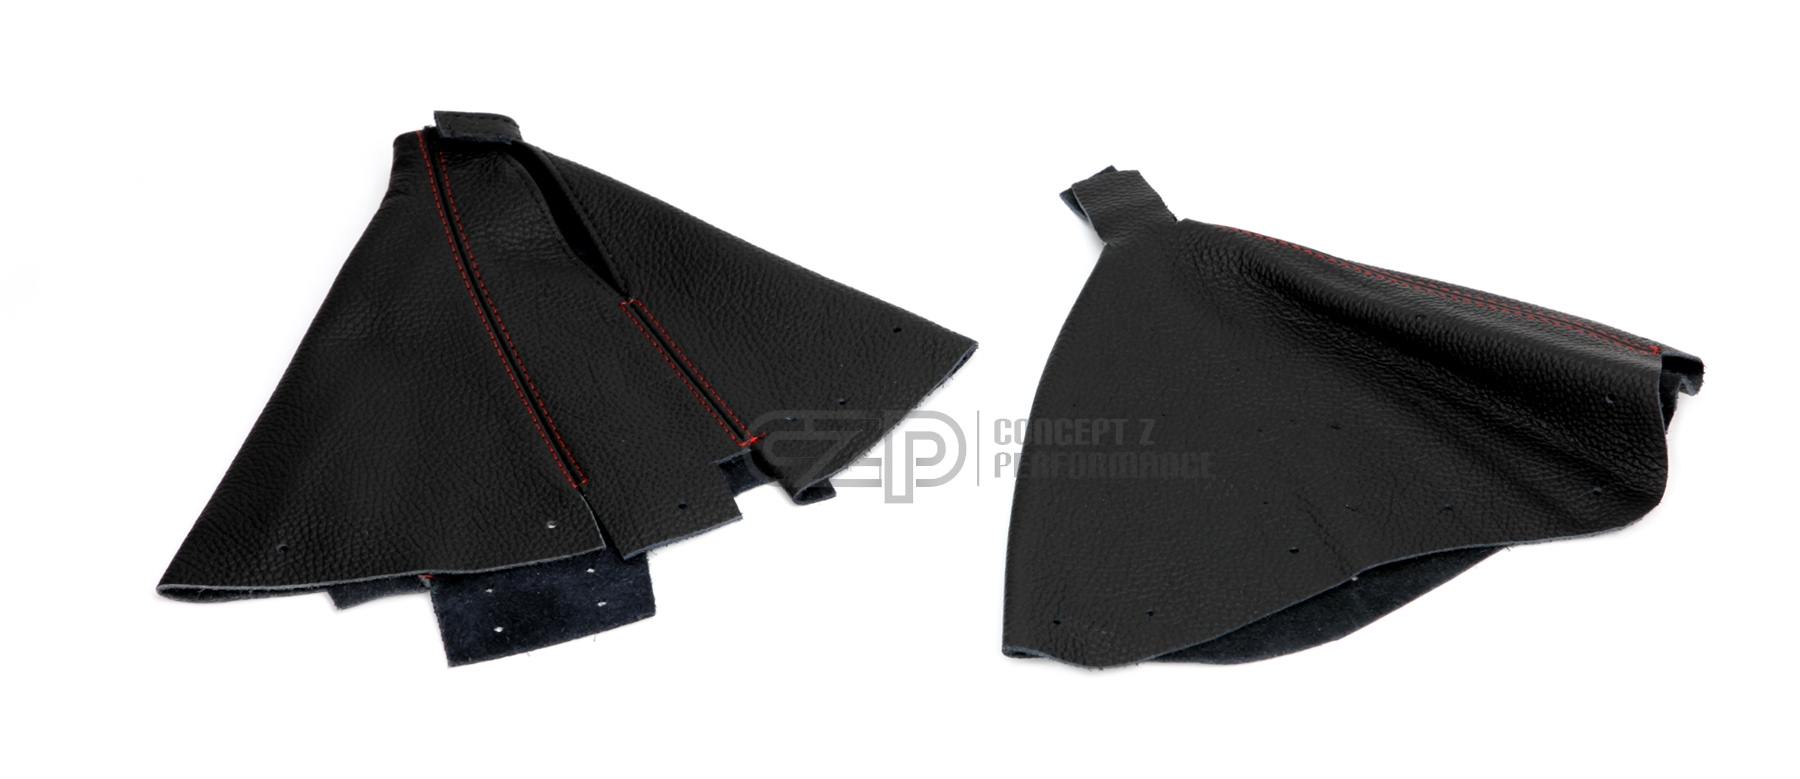 Brake Handbrake Handle Cover Replacement for NISSAN 300ZX Z32 1989-1996 Car Black Leather Red Stitching xuanL 